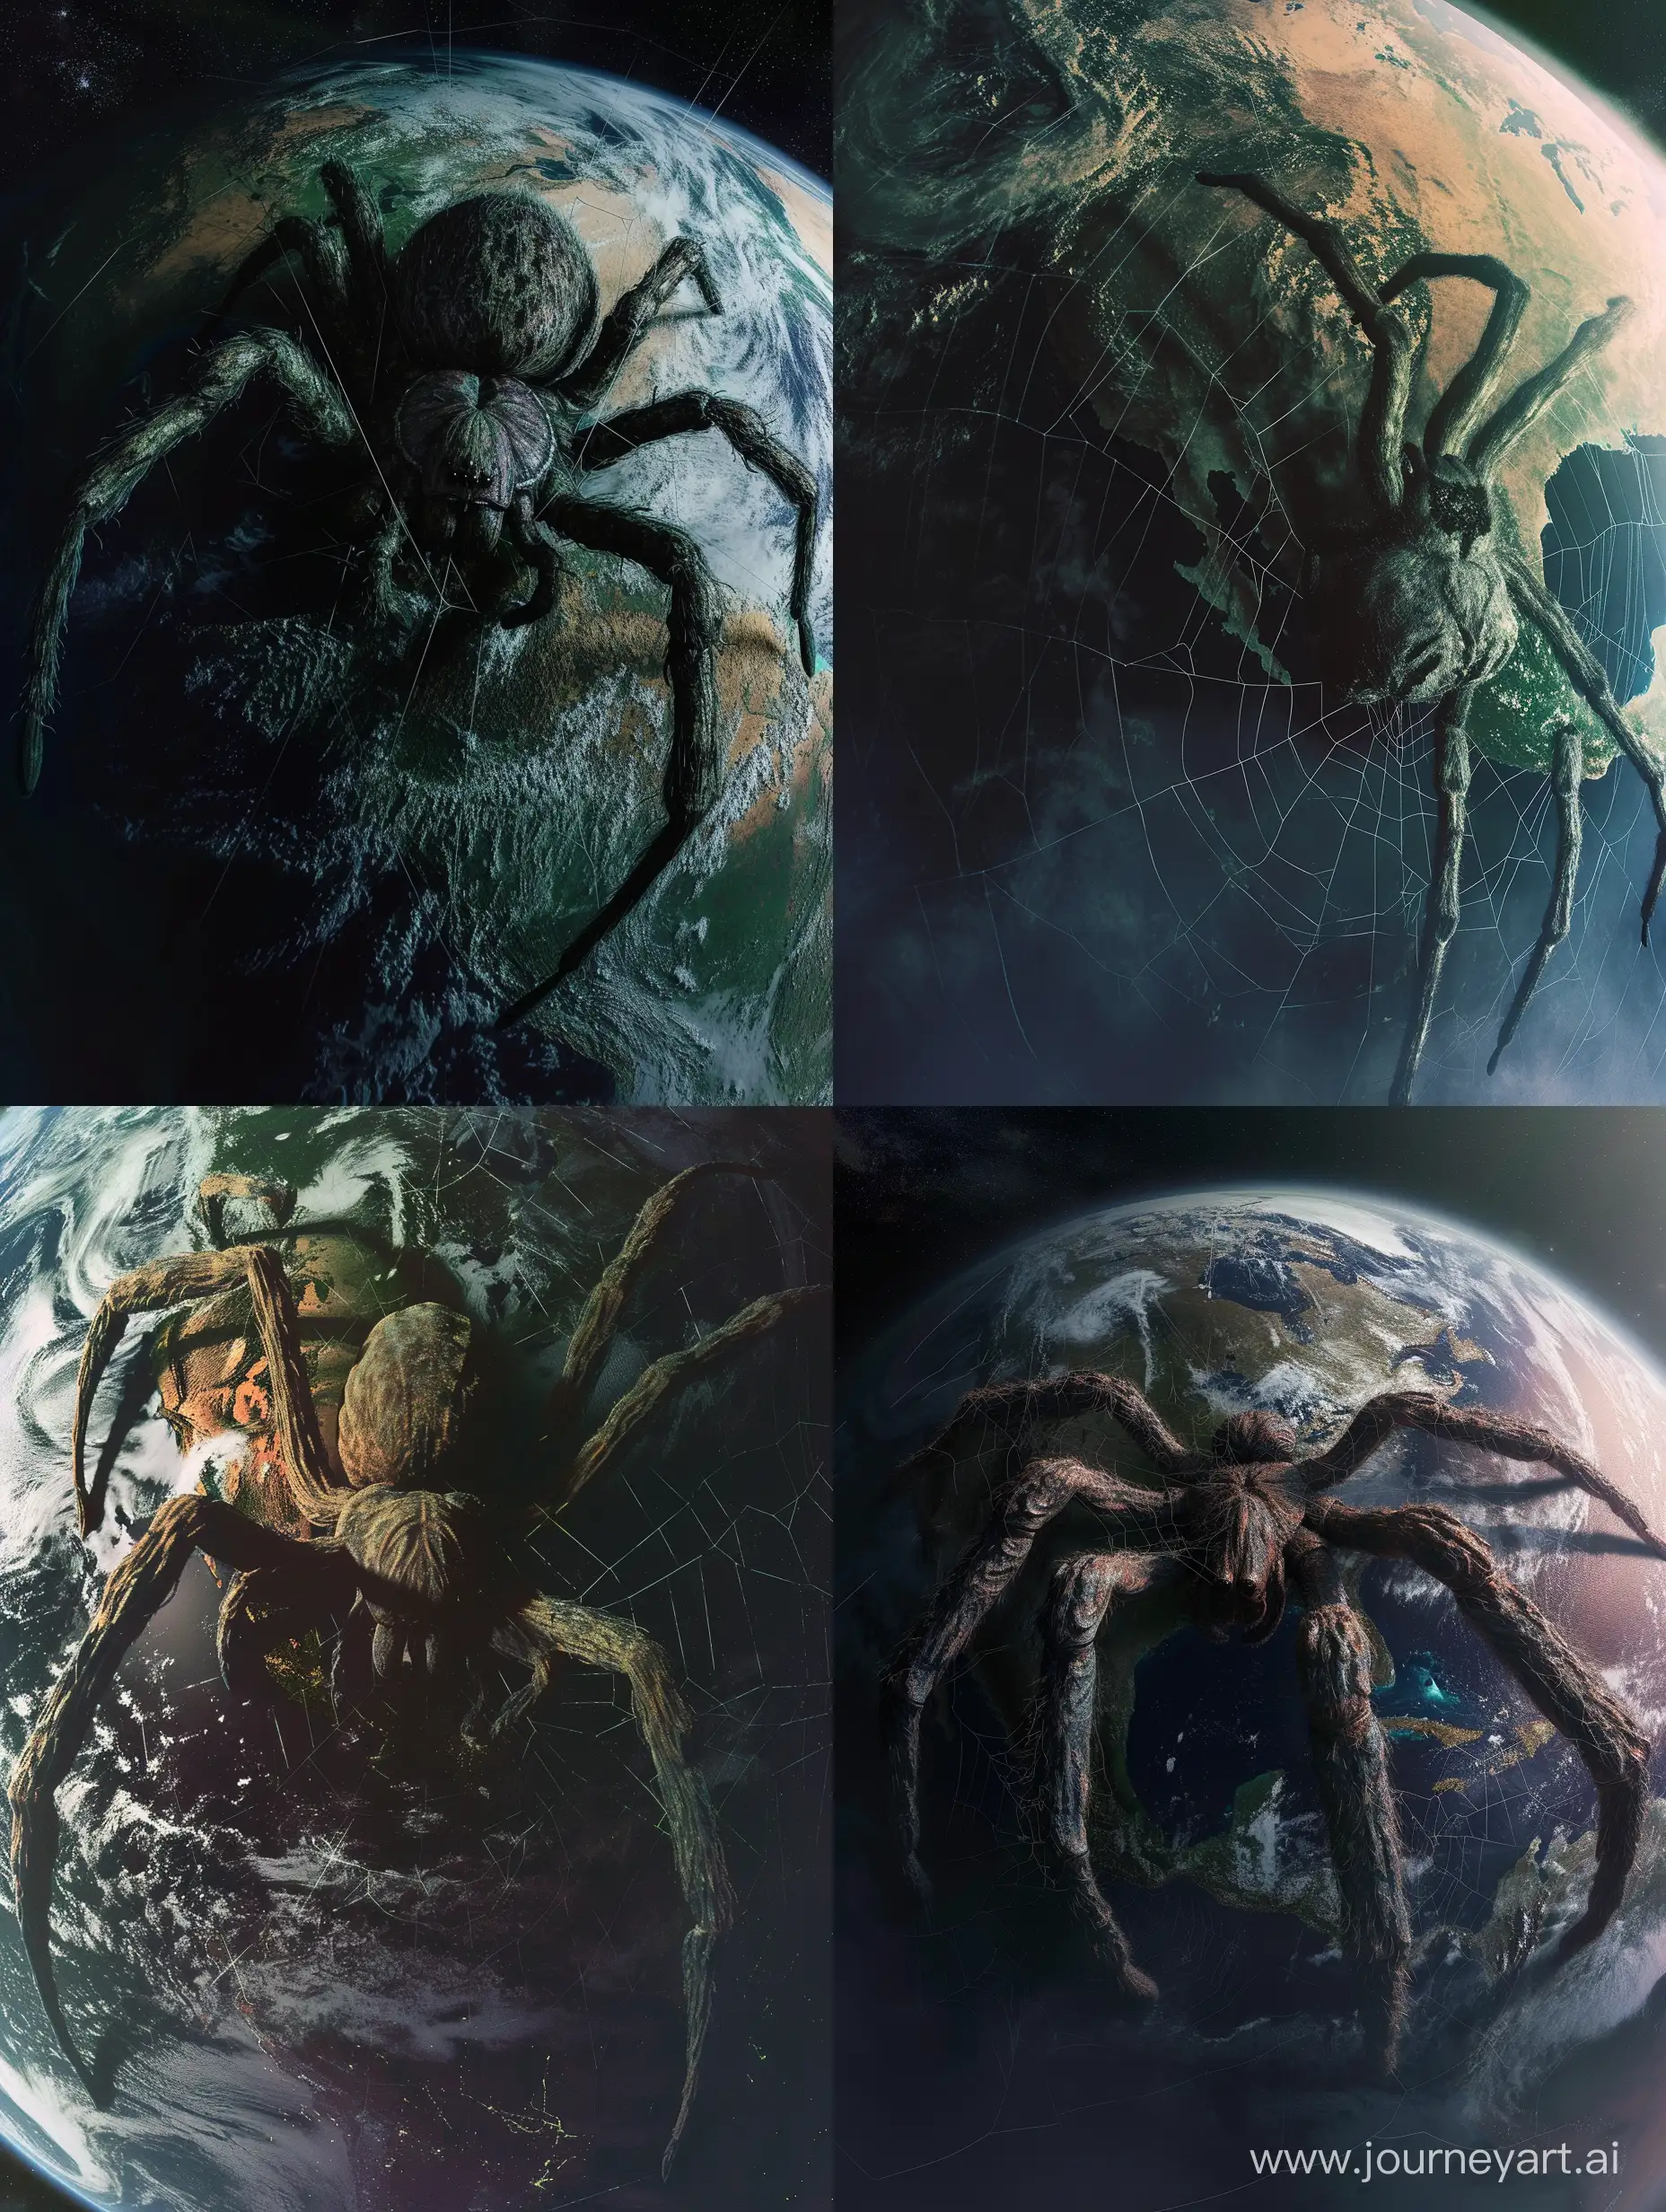 /imagine prompt:
color photo of a satellite view from space, capturing a massive spider crawling across the entirety of planet Earth. The spider's grotesque form is illuminated by a dim, eerie light, casting ominous shadows across the globe. Its long, spindly legs extend outward, enveloping the entire planet in a sprawling, intricate spiderweb. The vastness of the Earth is emphasized by the far birds-eye perspective, evoking a sense of insignificance and vulnerability. The color grading, with desaturated tones and hints of sickly greens and purples, enhances the creepy and sinister atmosphere, suggesting that Earth has been abandoned, devoid of human presence. This panoramic view presents a haunting reminder of the spider's dominance over the planet.